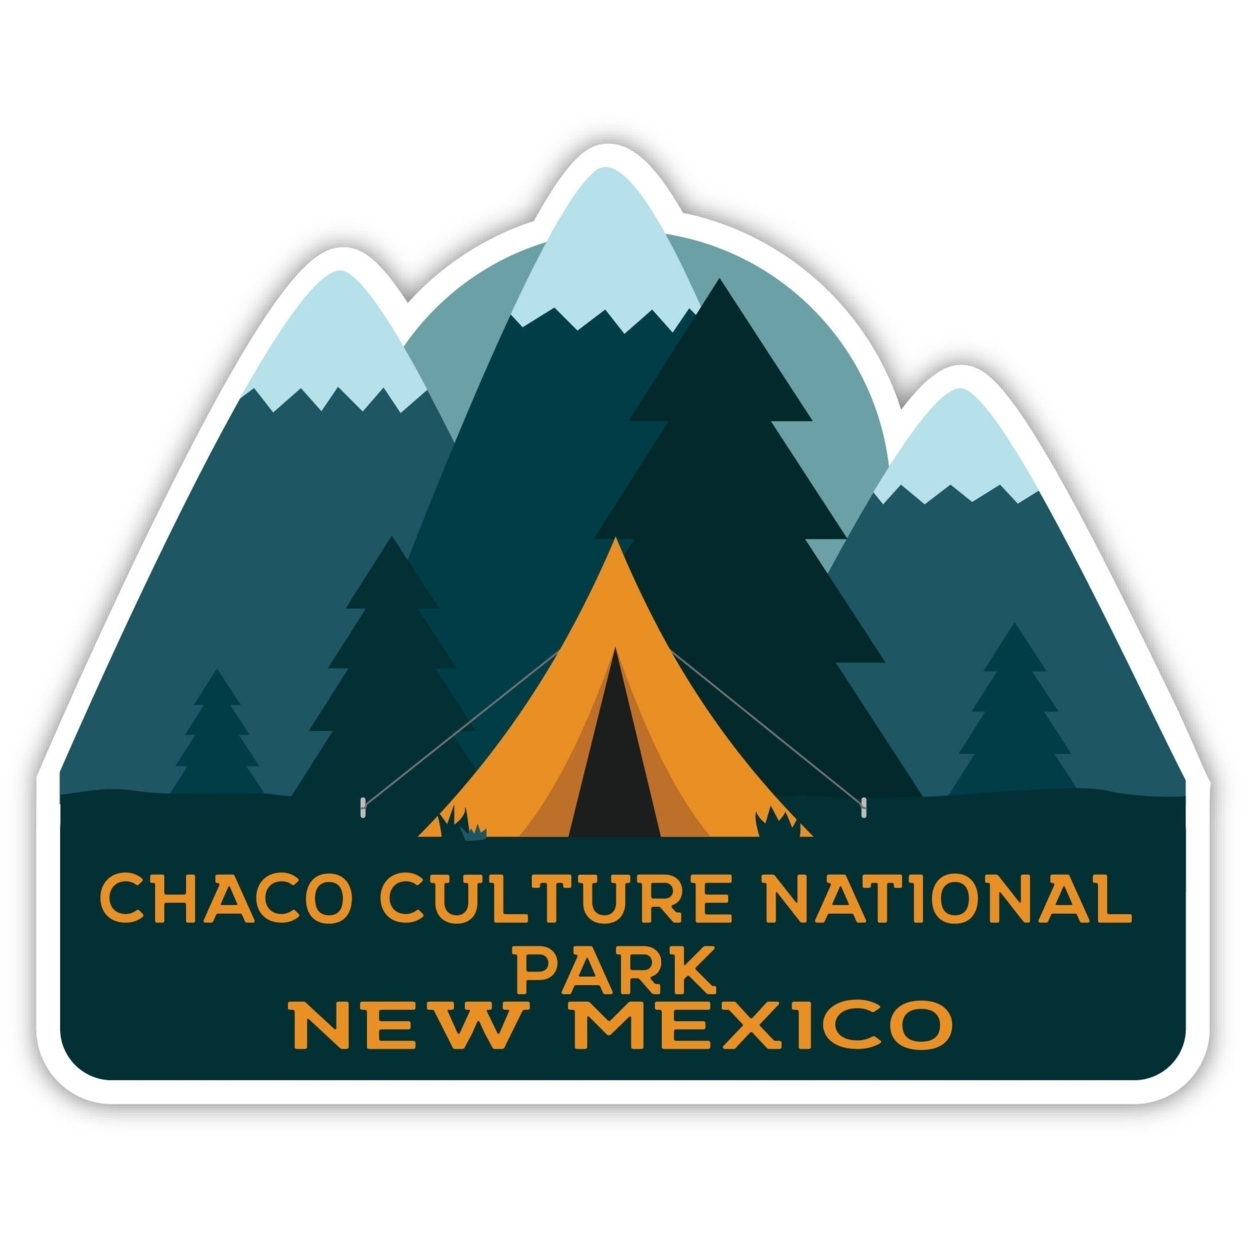 Chaco Culture National Park New Mexico Souvenir Decorative Stickers (Choose Theme And Size) - 4-Pack, 8-Inch, Tent